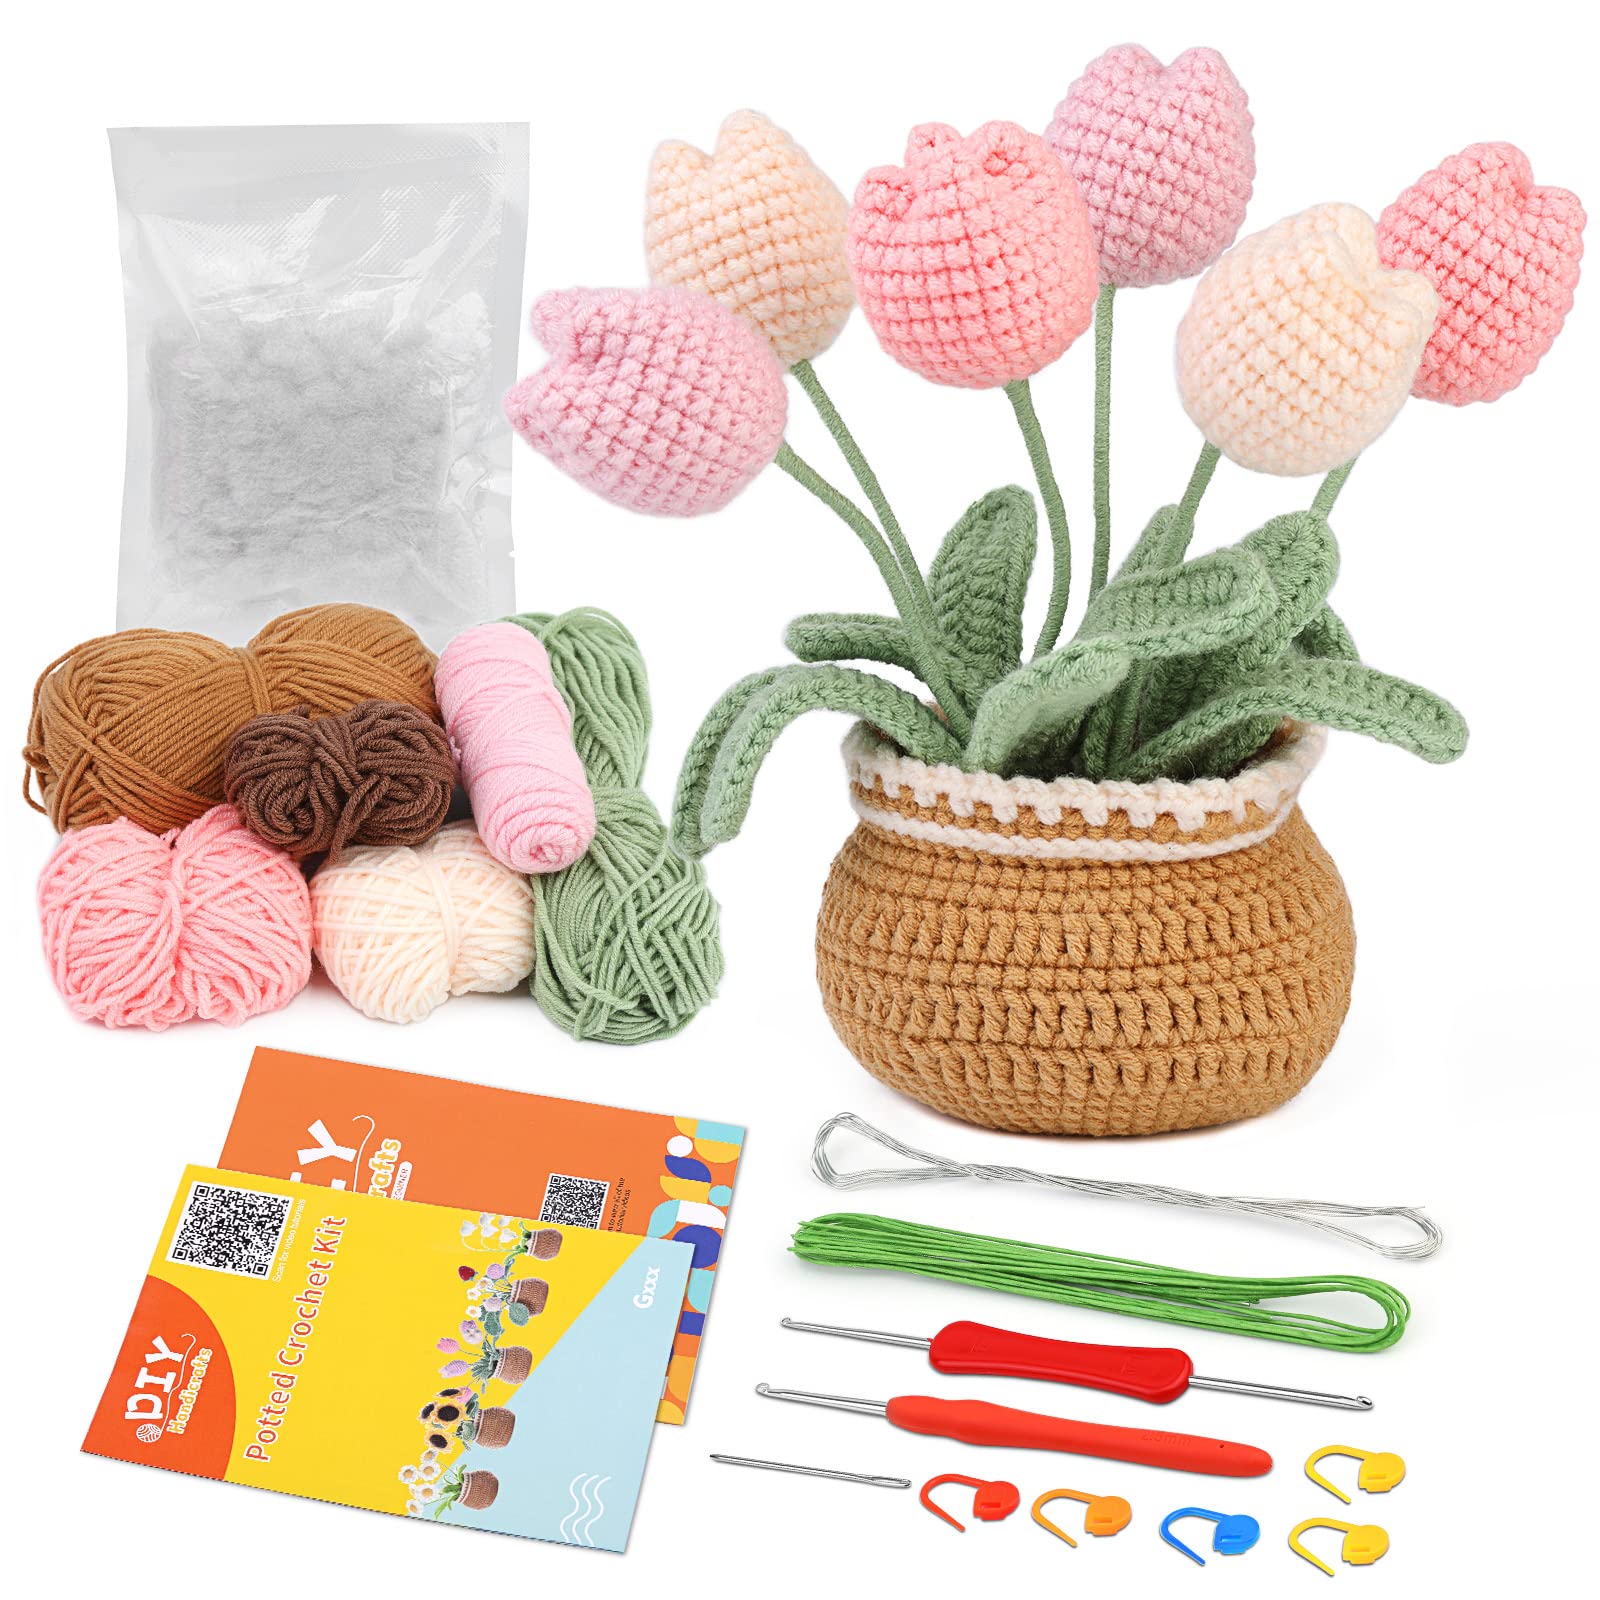 FECLOUD Crochet Knitting Kit for Beginners - Multicolored Potted Tulip for  Beginners Adults, Step-by-Step Video Tutorials, Learn to Knit Kits for